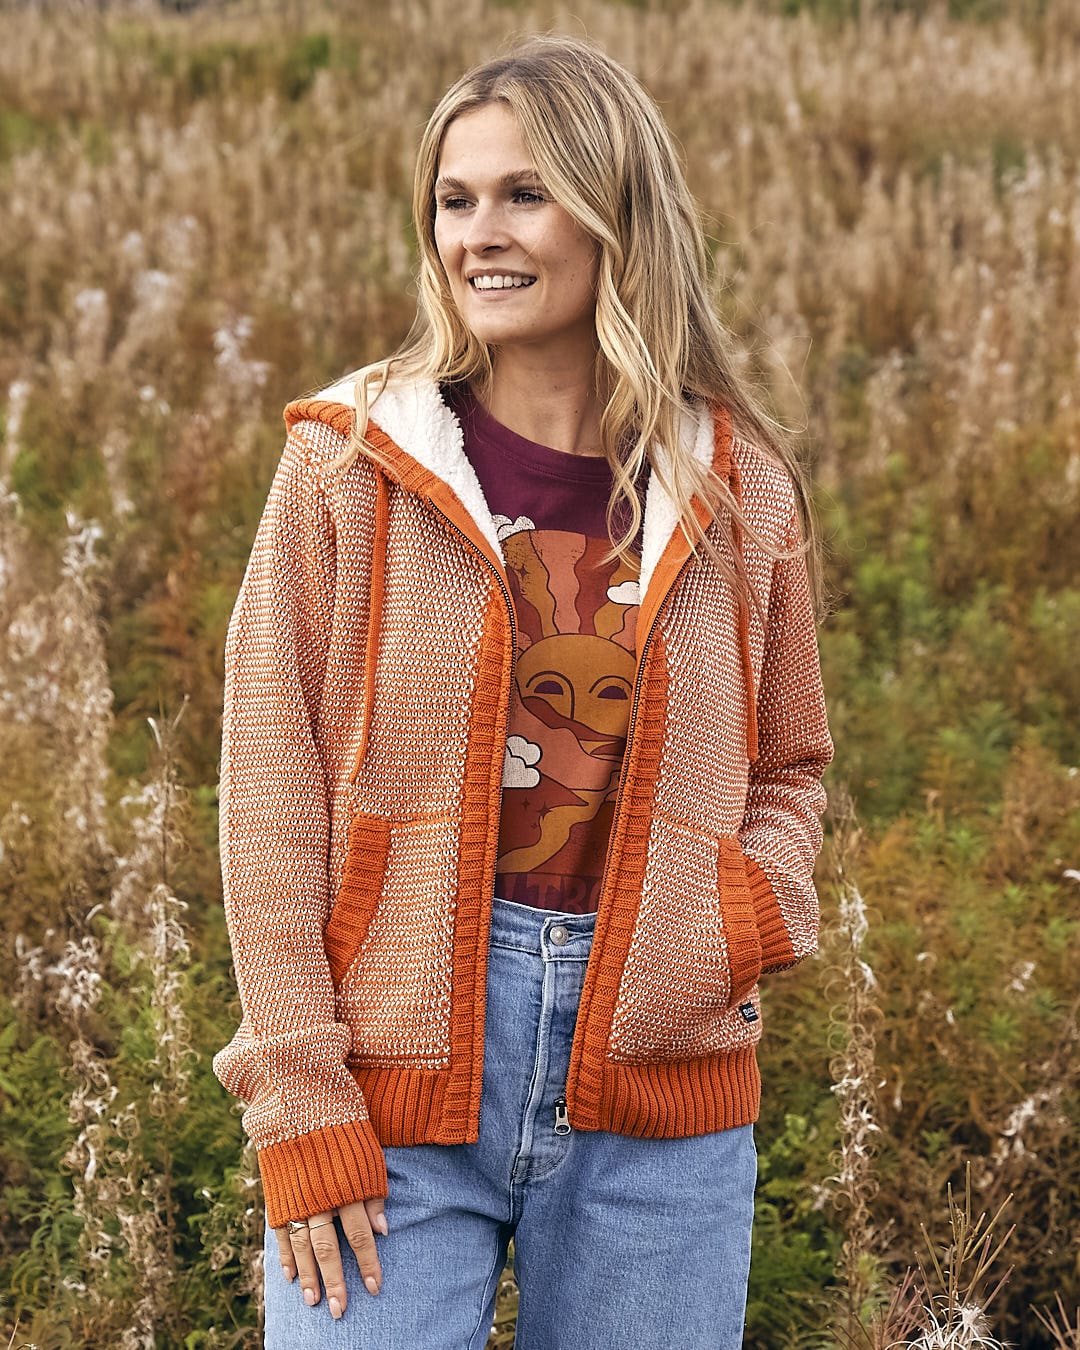 A woman in a Saltrock Helly - Womens Borg Lined Knitted Hoodie - Orange sweater and jeans standing in a field.